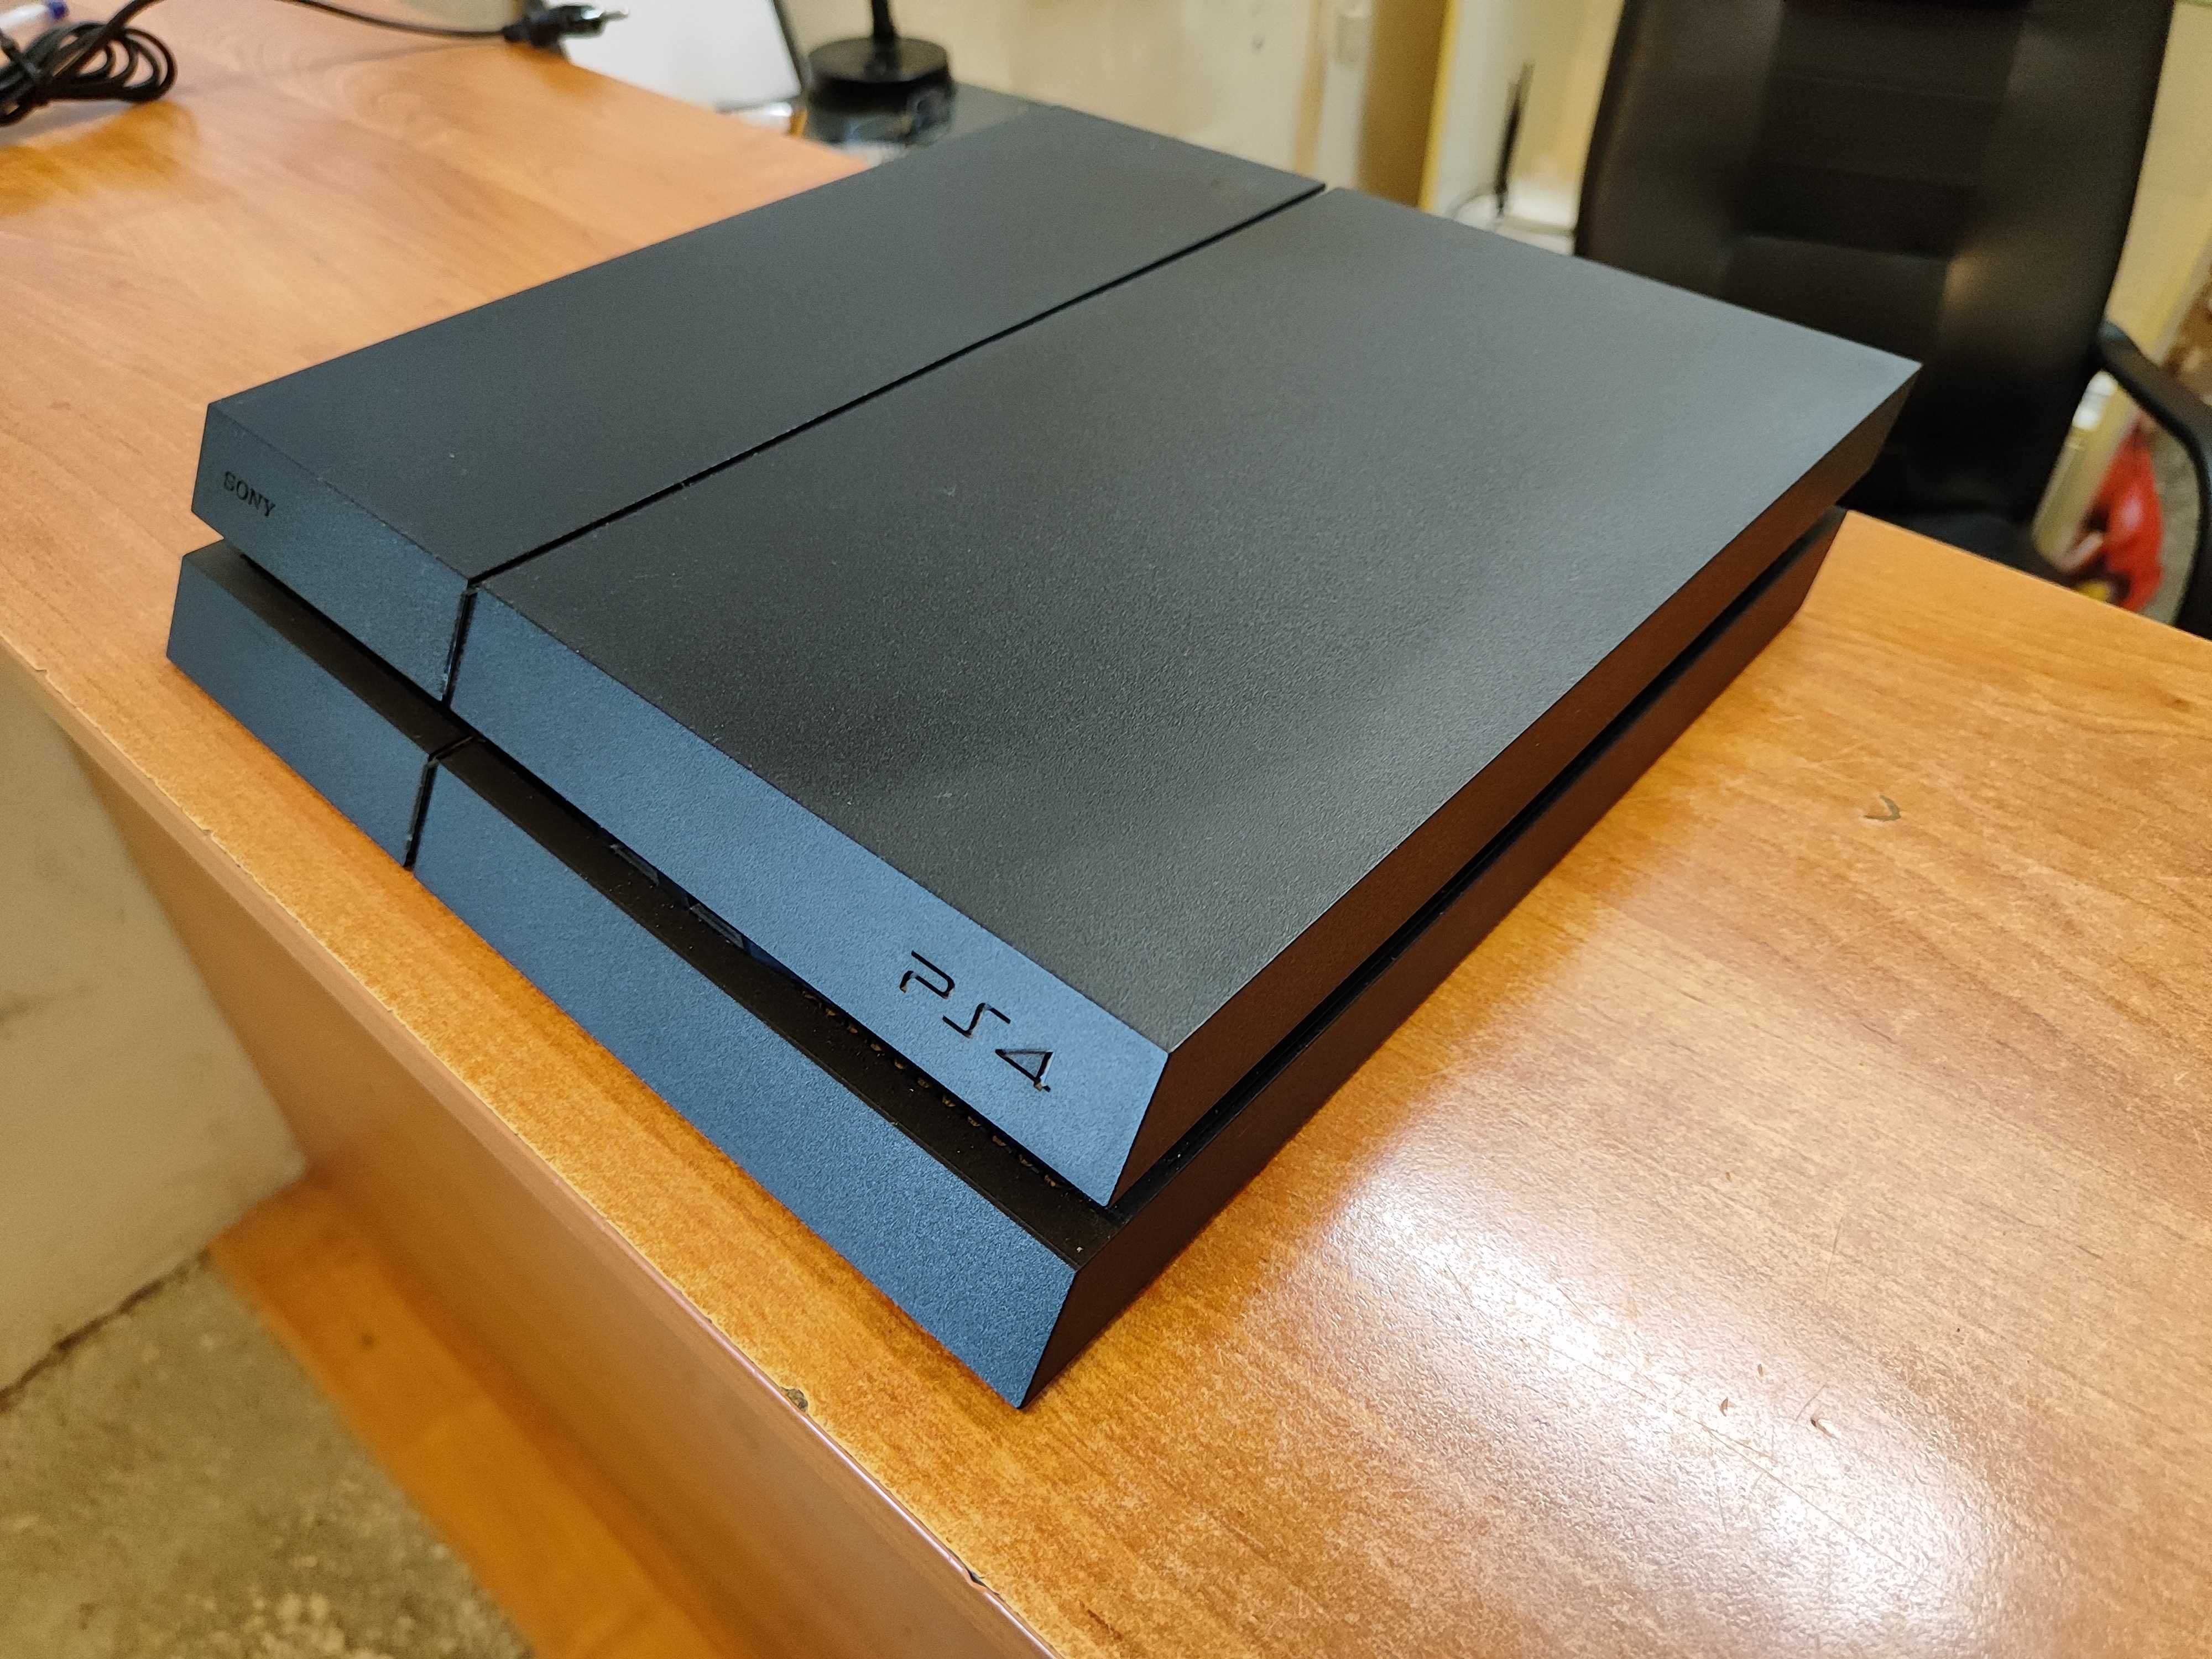 PS4 Sony Playstation 4 1 TB Ultimate Player Edition [CUH-1216B]